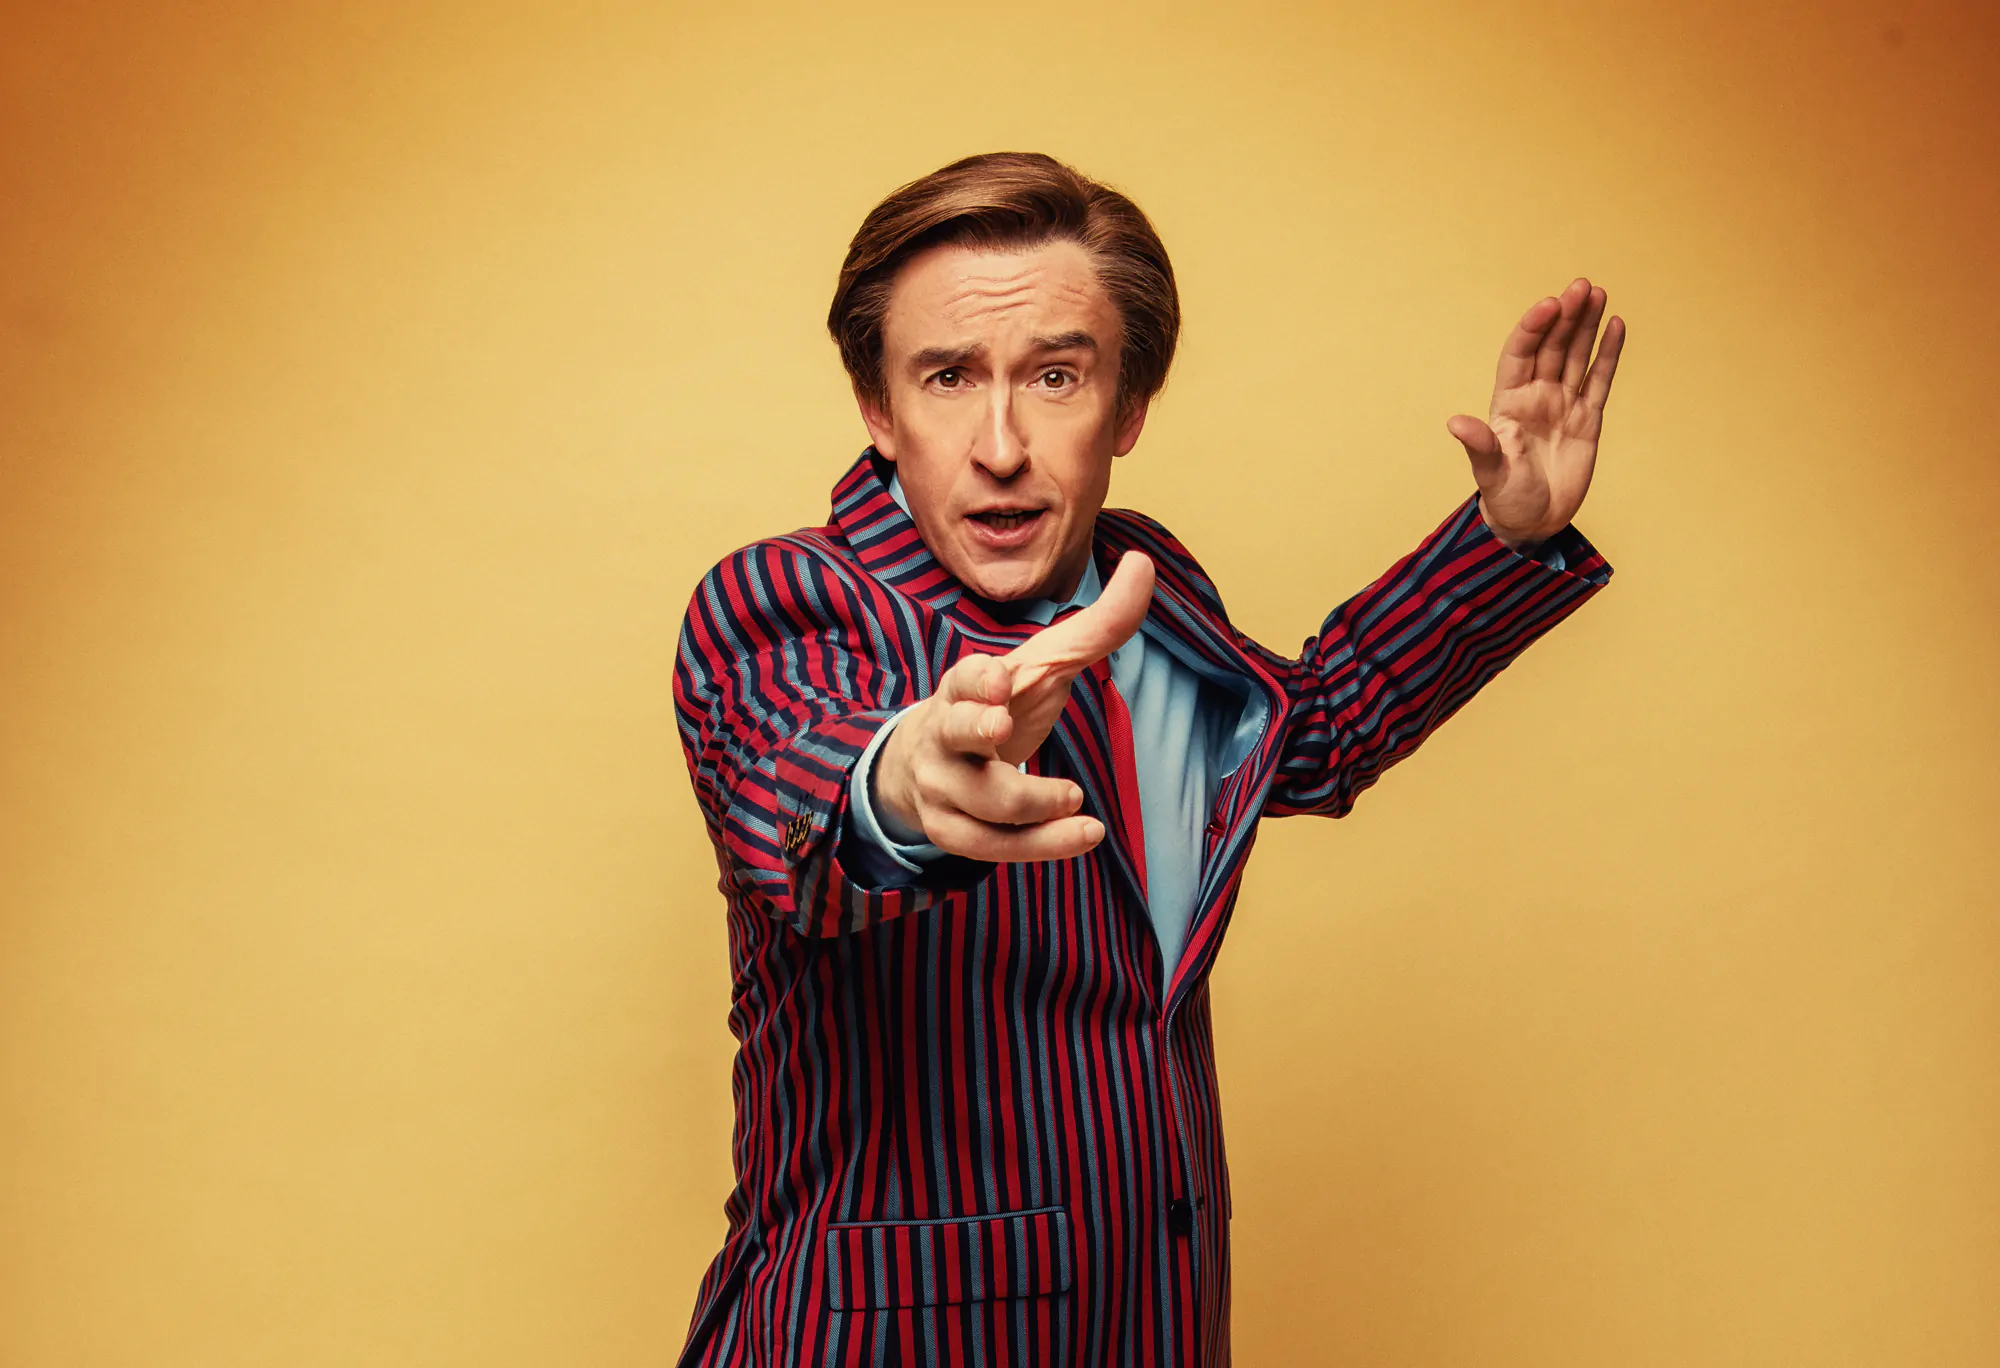 AHA! STRATAGEM WITH ALAN PARTRIDGE, a live stage show starring Steve Coogan comes to The SSE Arena, Belfast: Friday 22 April 2022